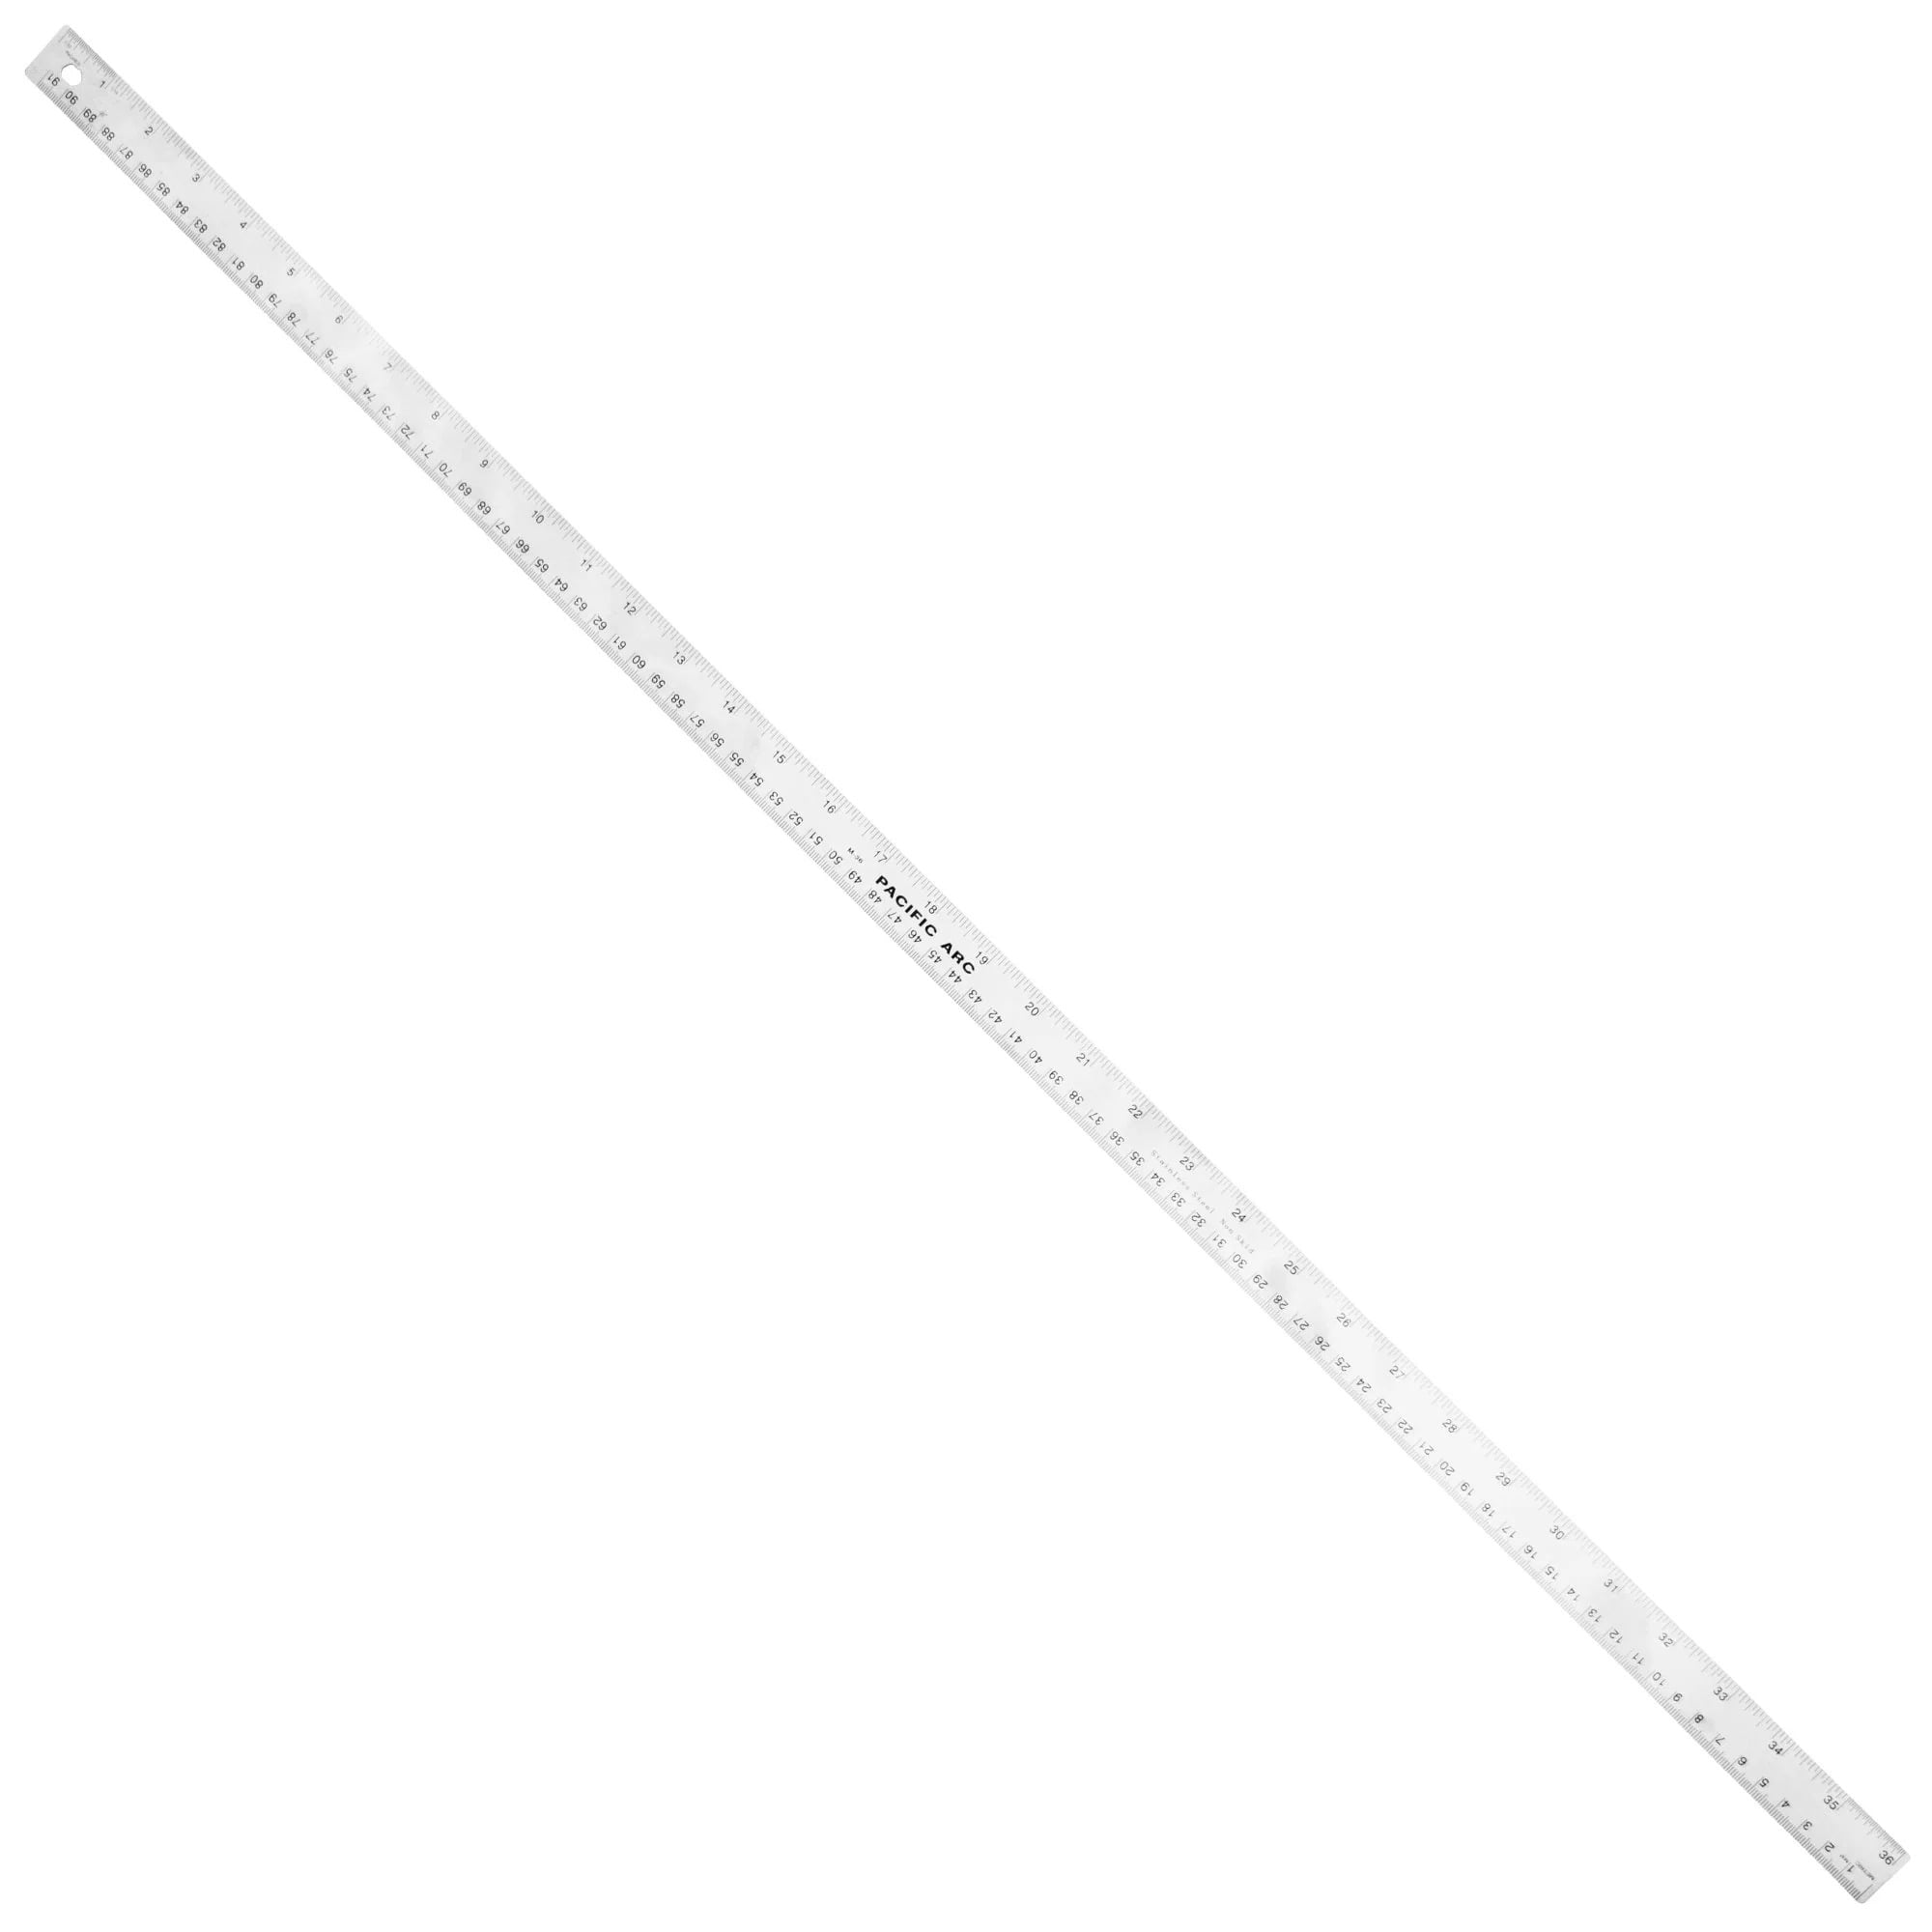 Pacific Arc Stainless Steel 12 Inch Metal Ruler Non-Slip Cork Back, with  Inch and Metric Graduations